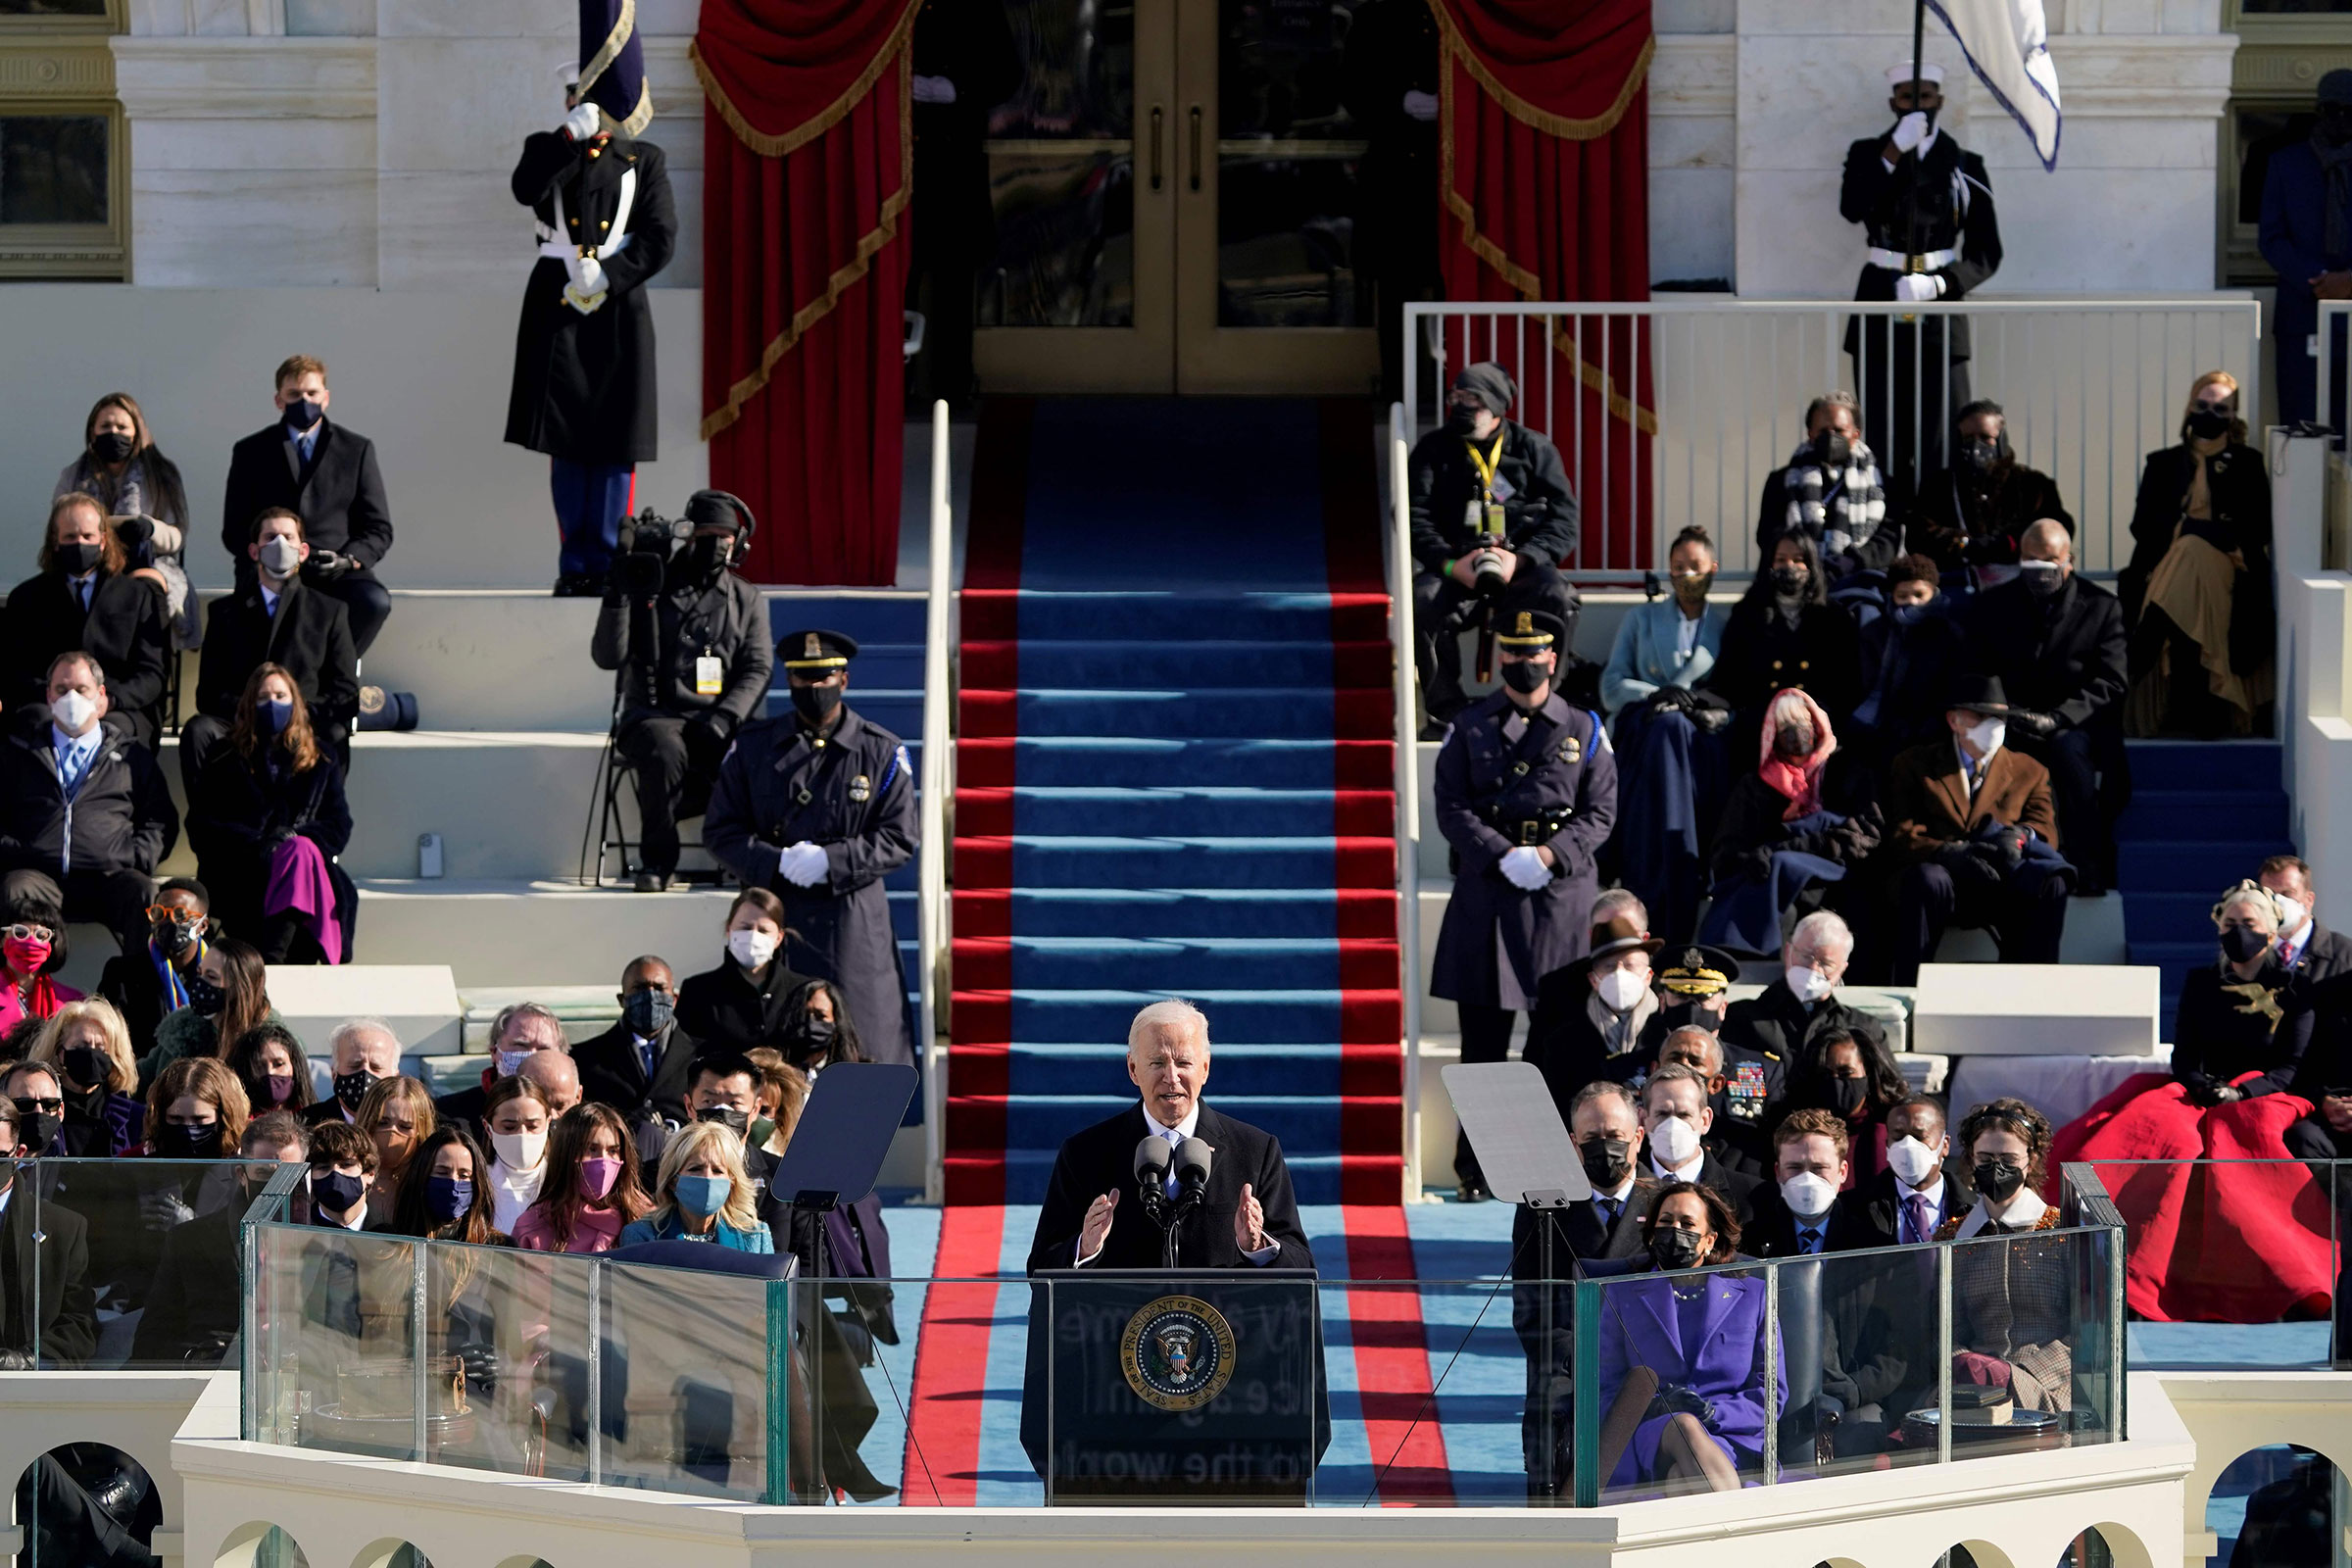 President Joe Biden delivers his inauguration speech after being sworn in as the 46th President of the United States in Washington on Jan. 20, 2021. (Patrick Semansky—Pool/AFP/Getty Images)